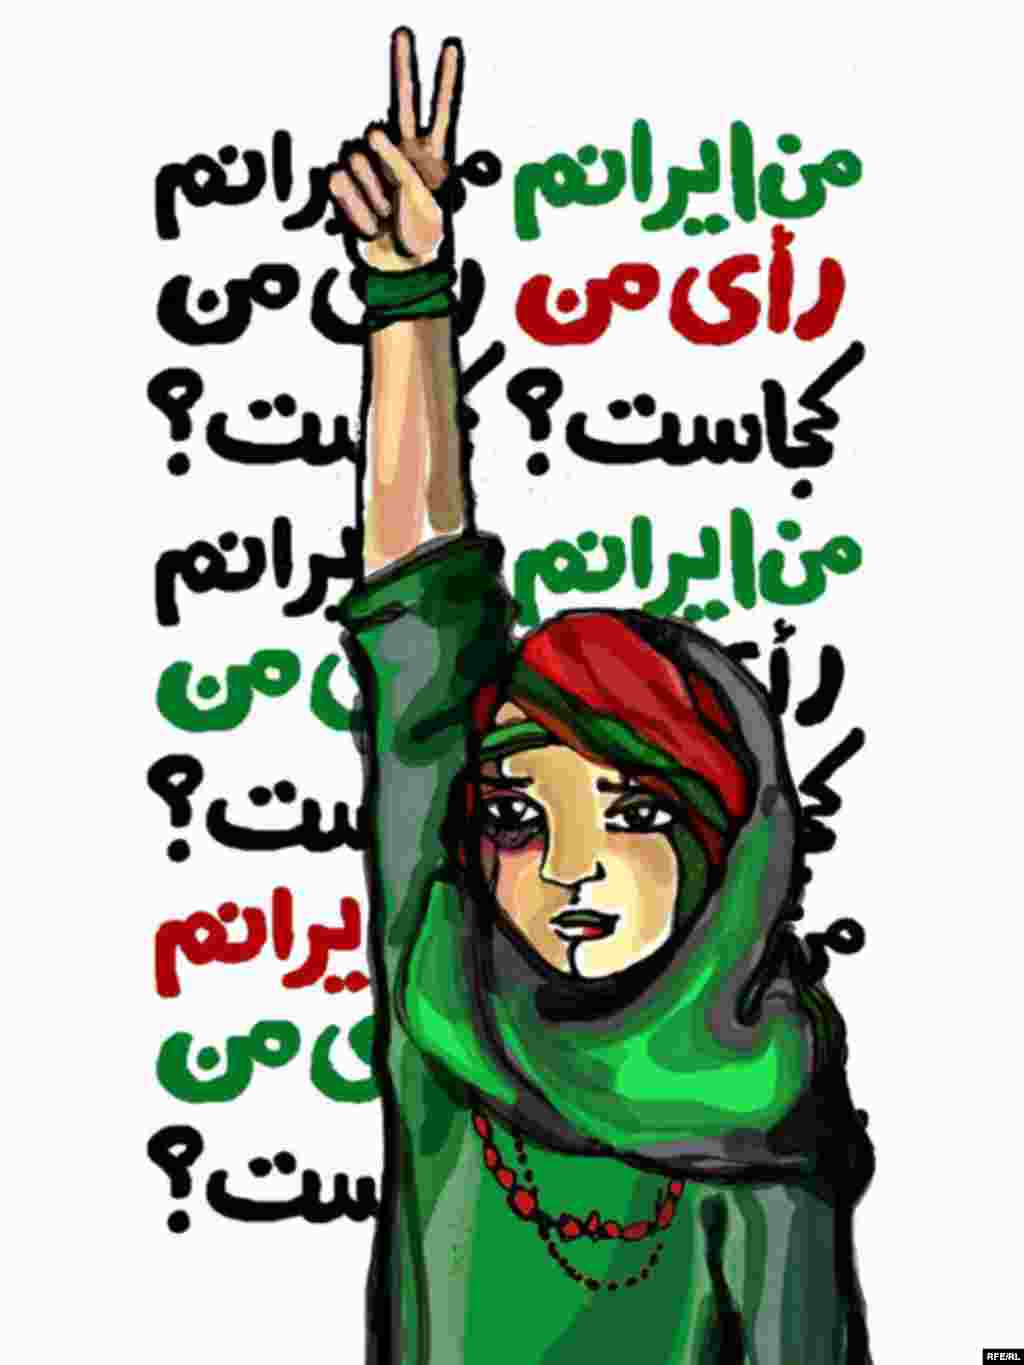 Iran's Election Unrest: An Artist's View #8